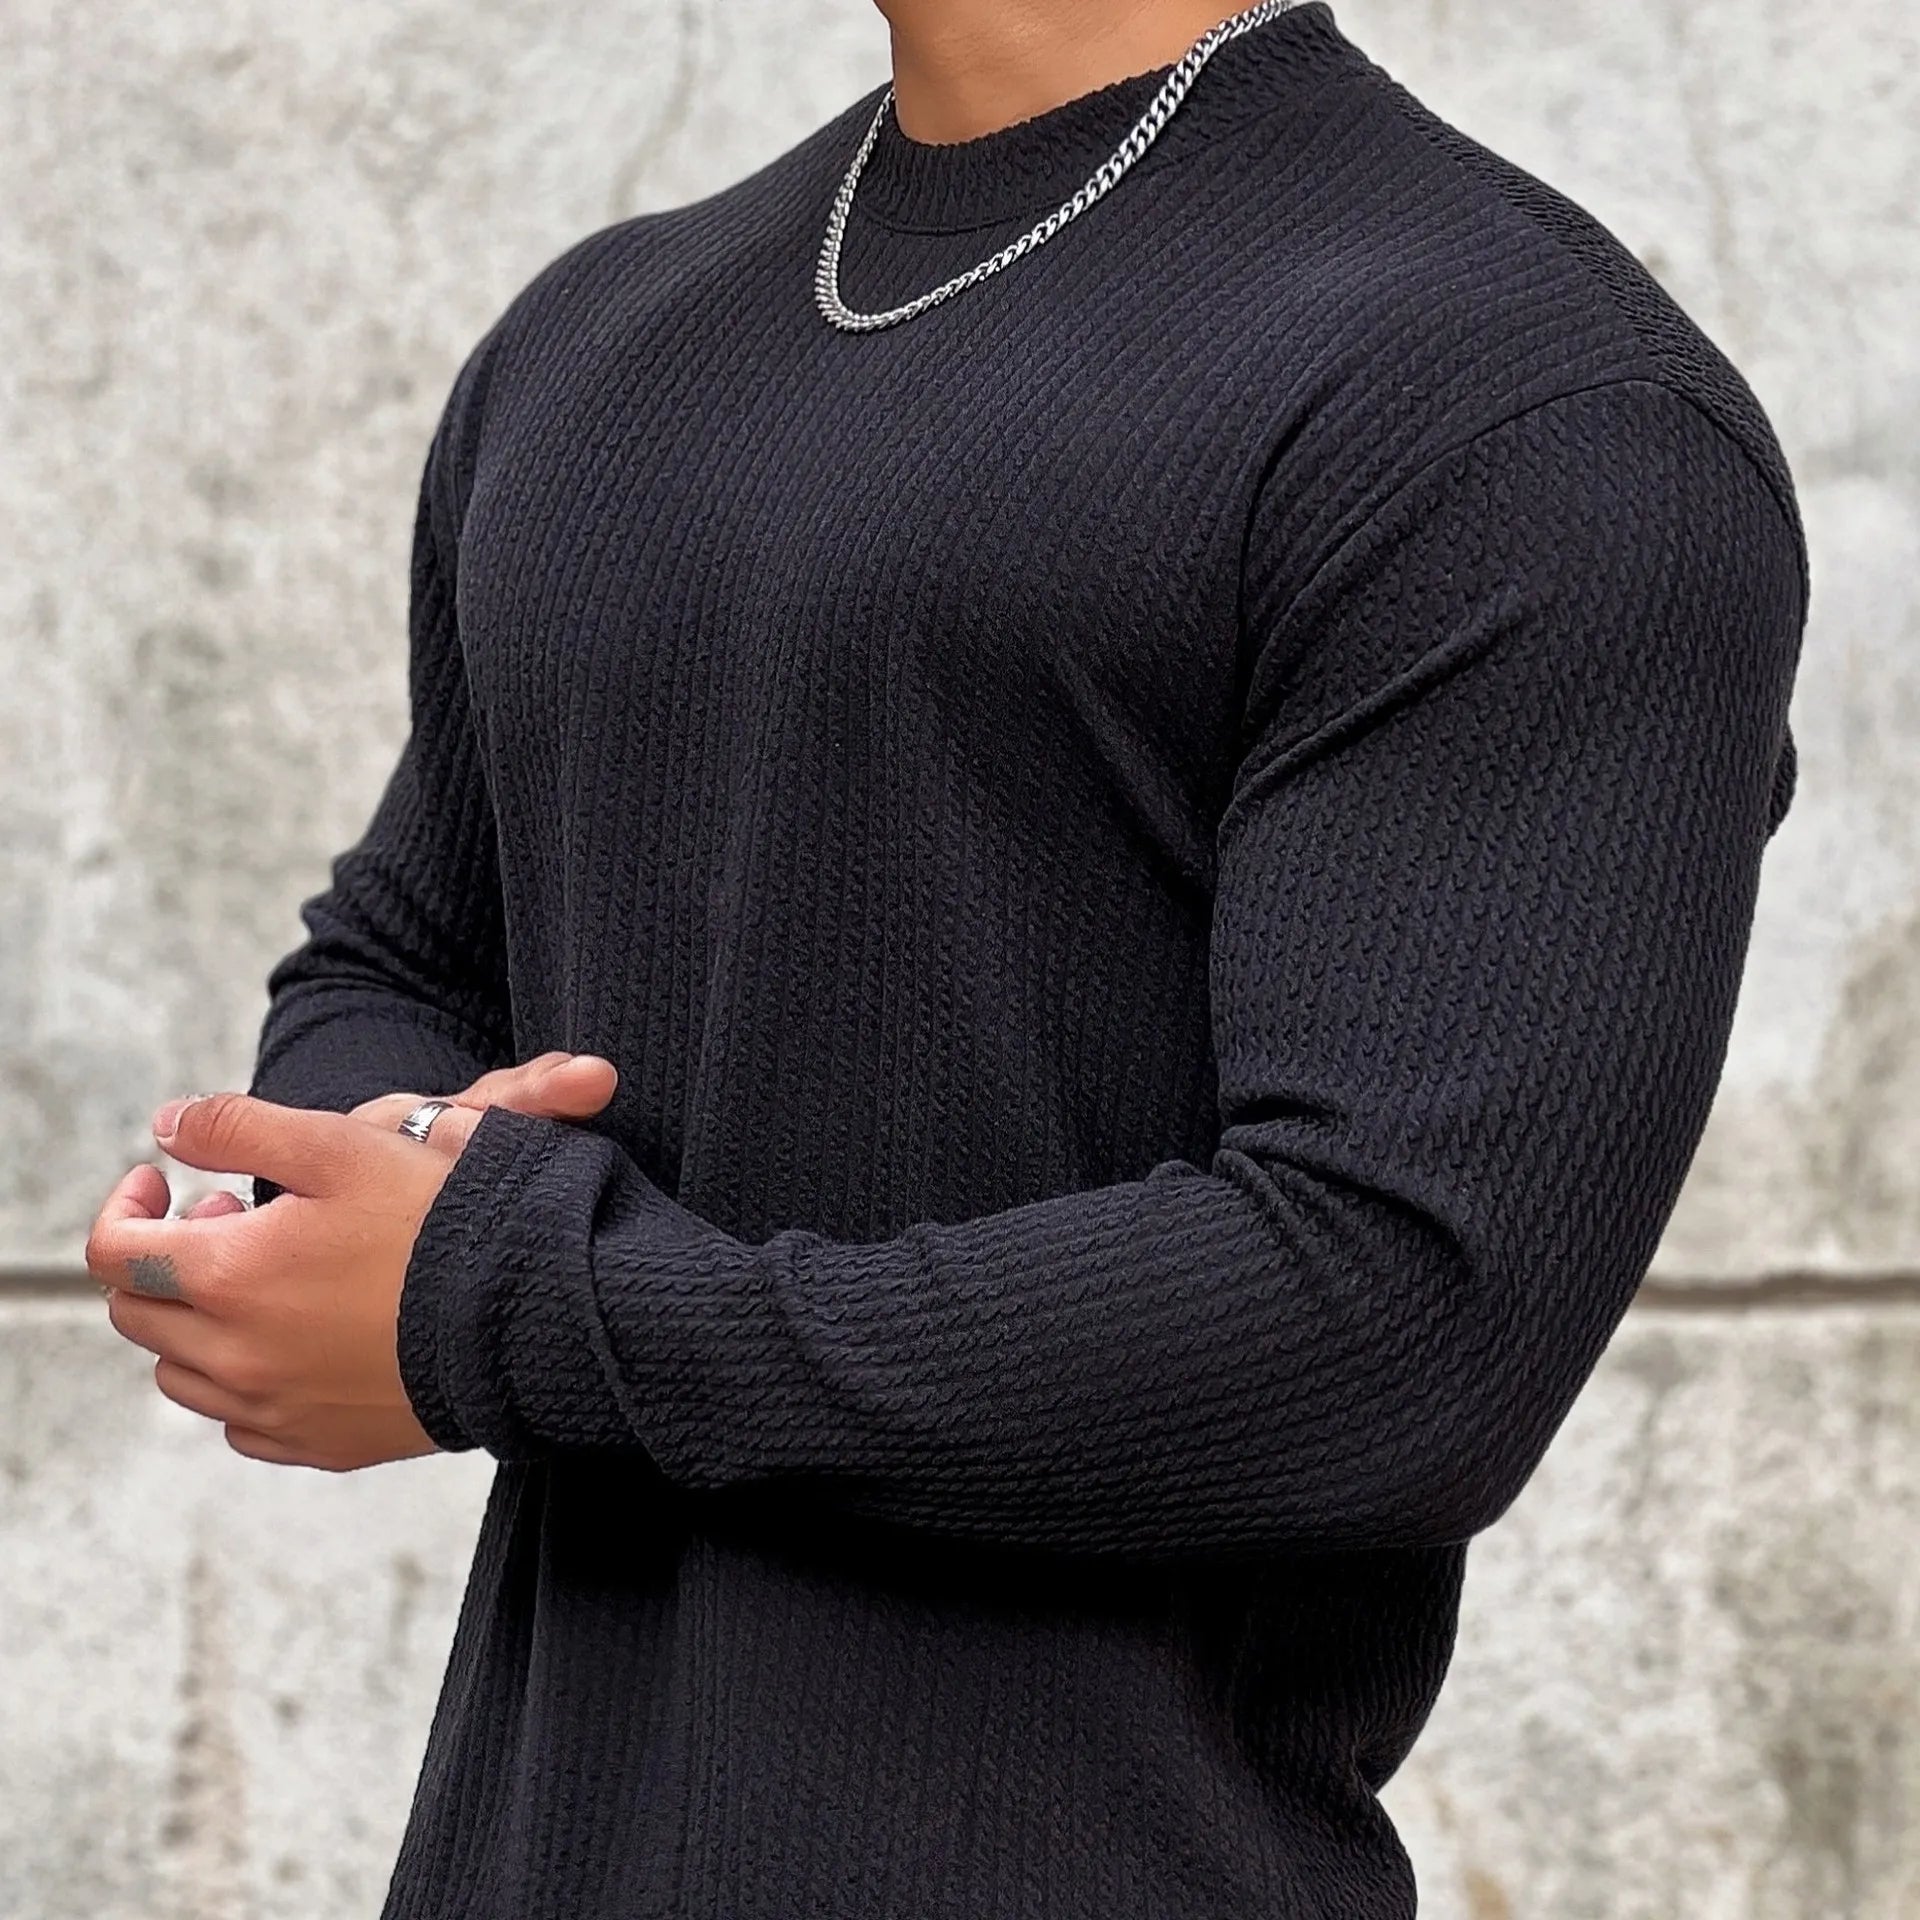 Nyhet Gympower Scrunched Shirt - Gympower